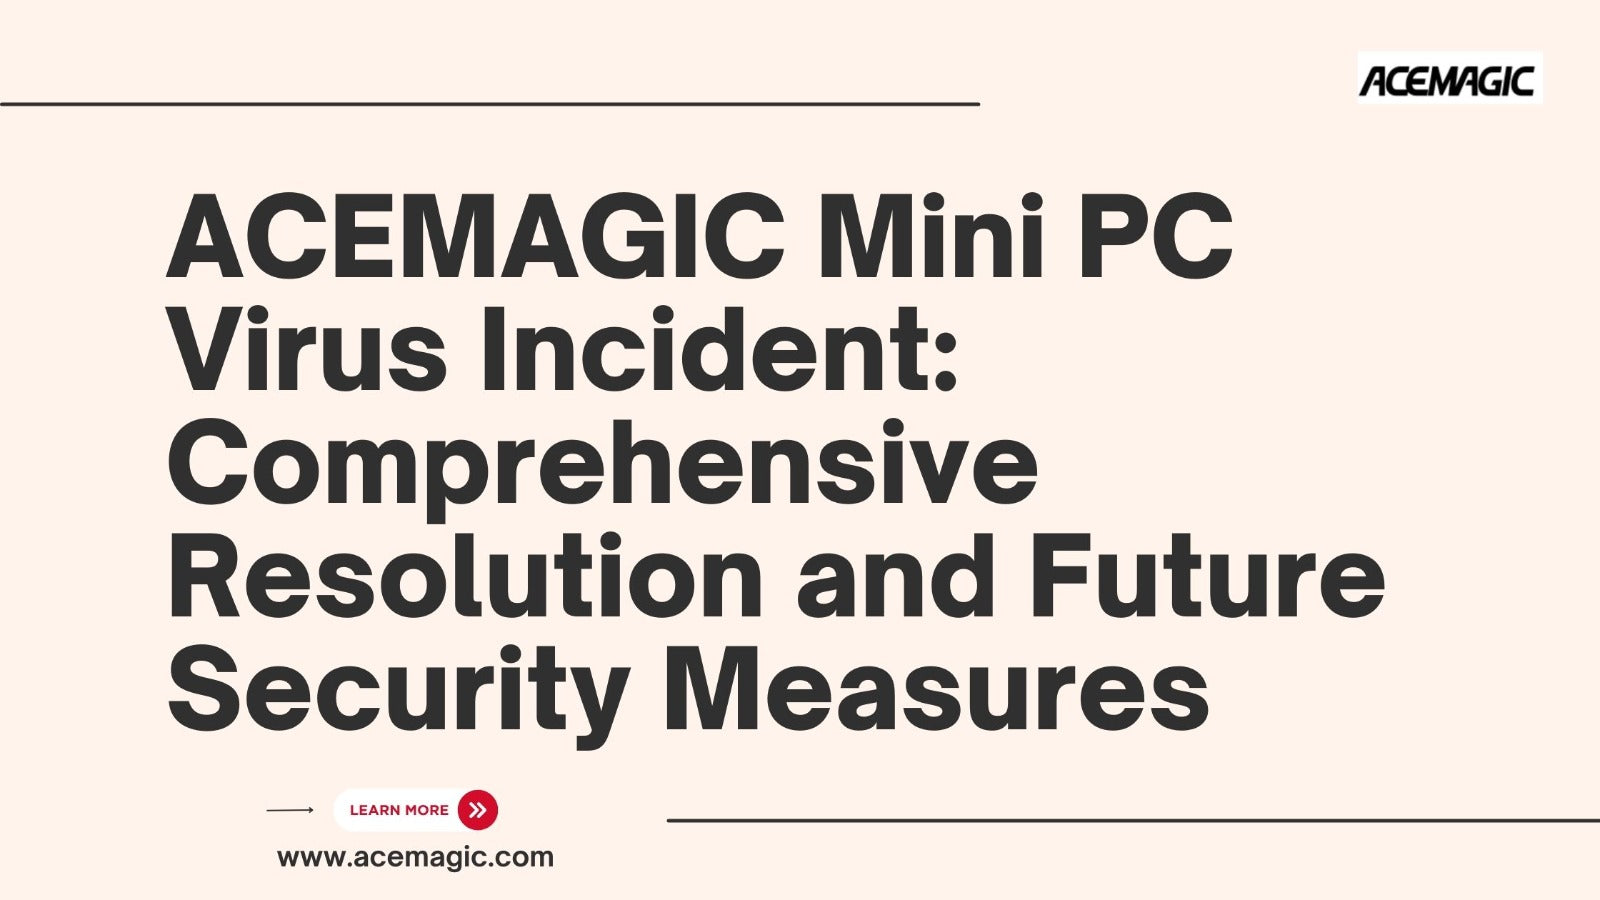 ACEMAGIC Mini PC Virus Incident: Comprehensive Resolution and Future Security Measures